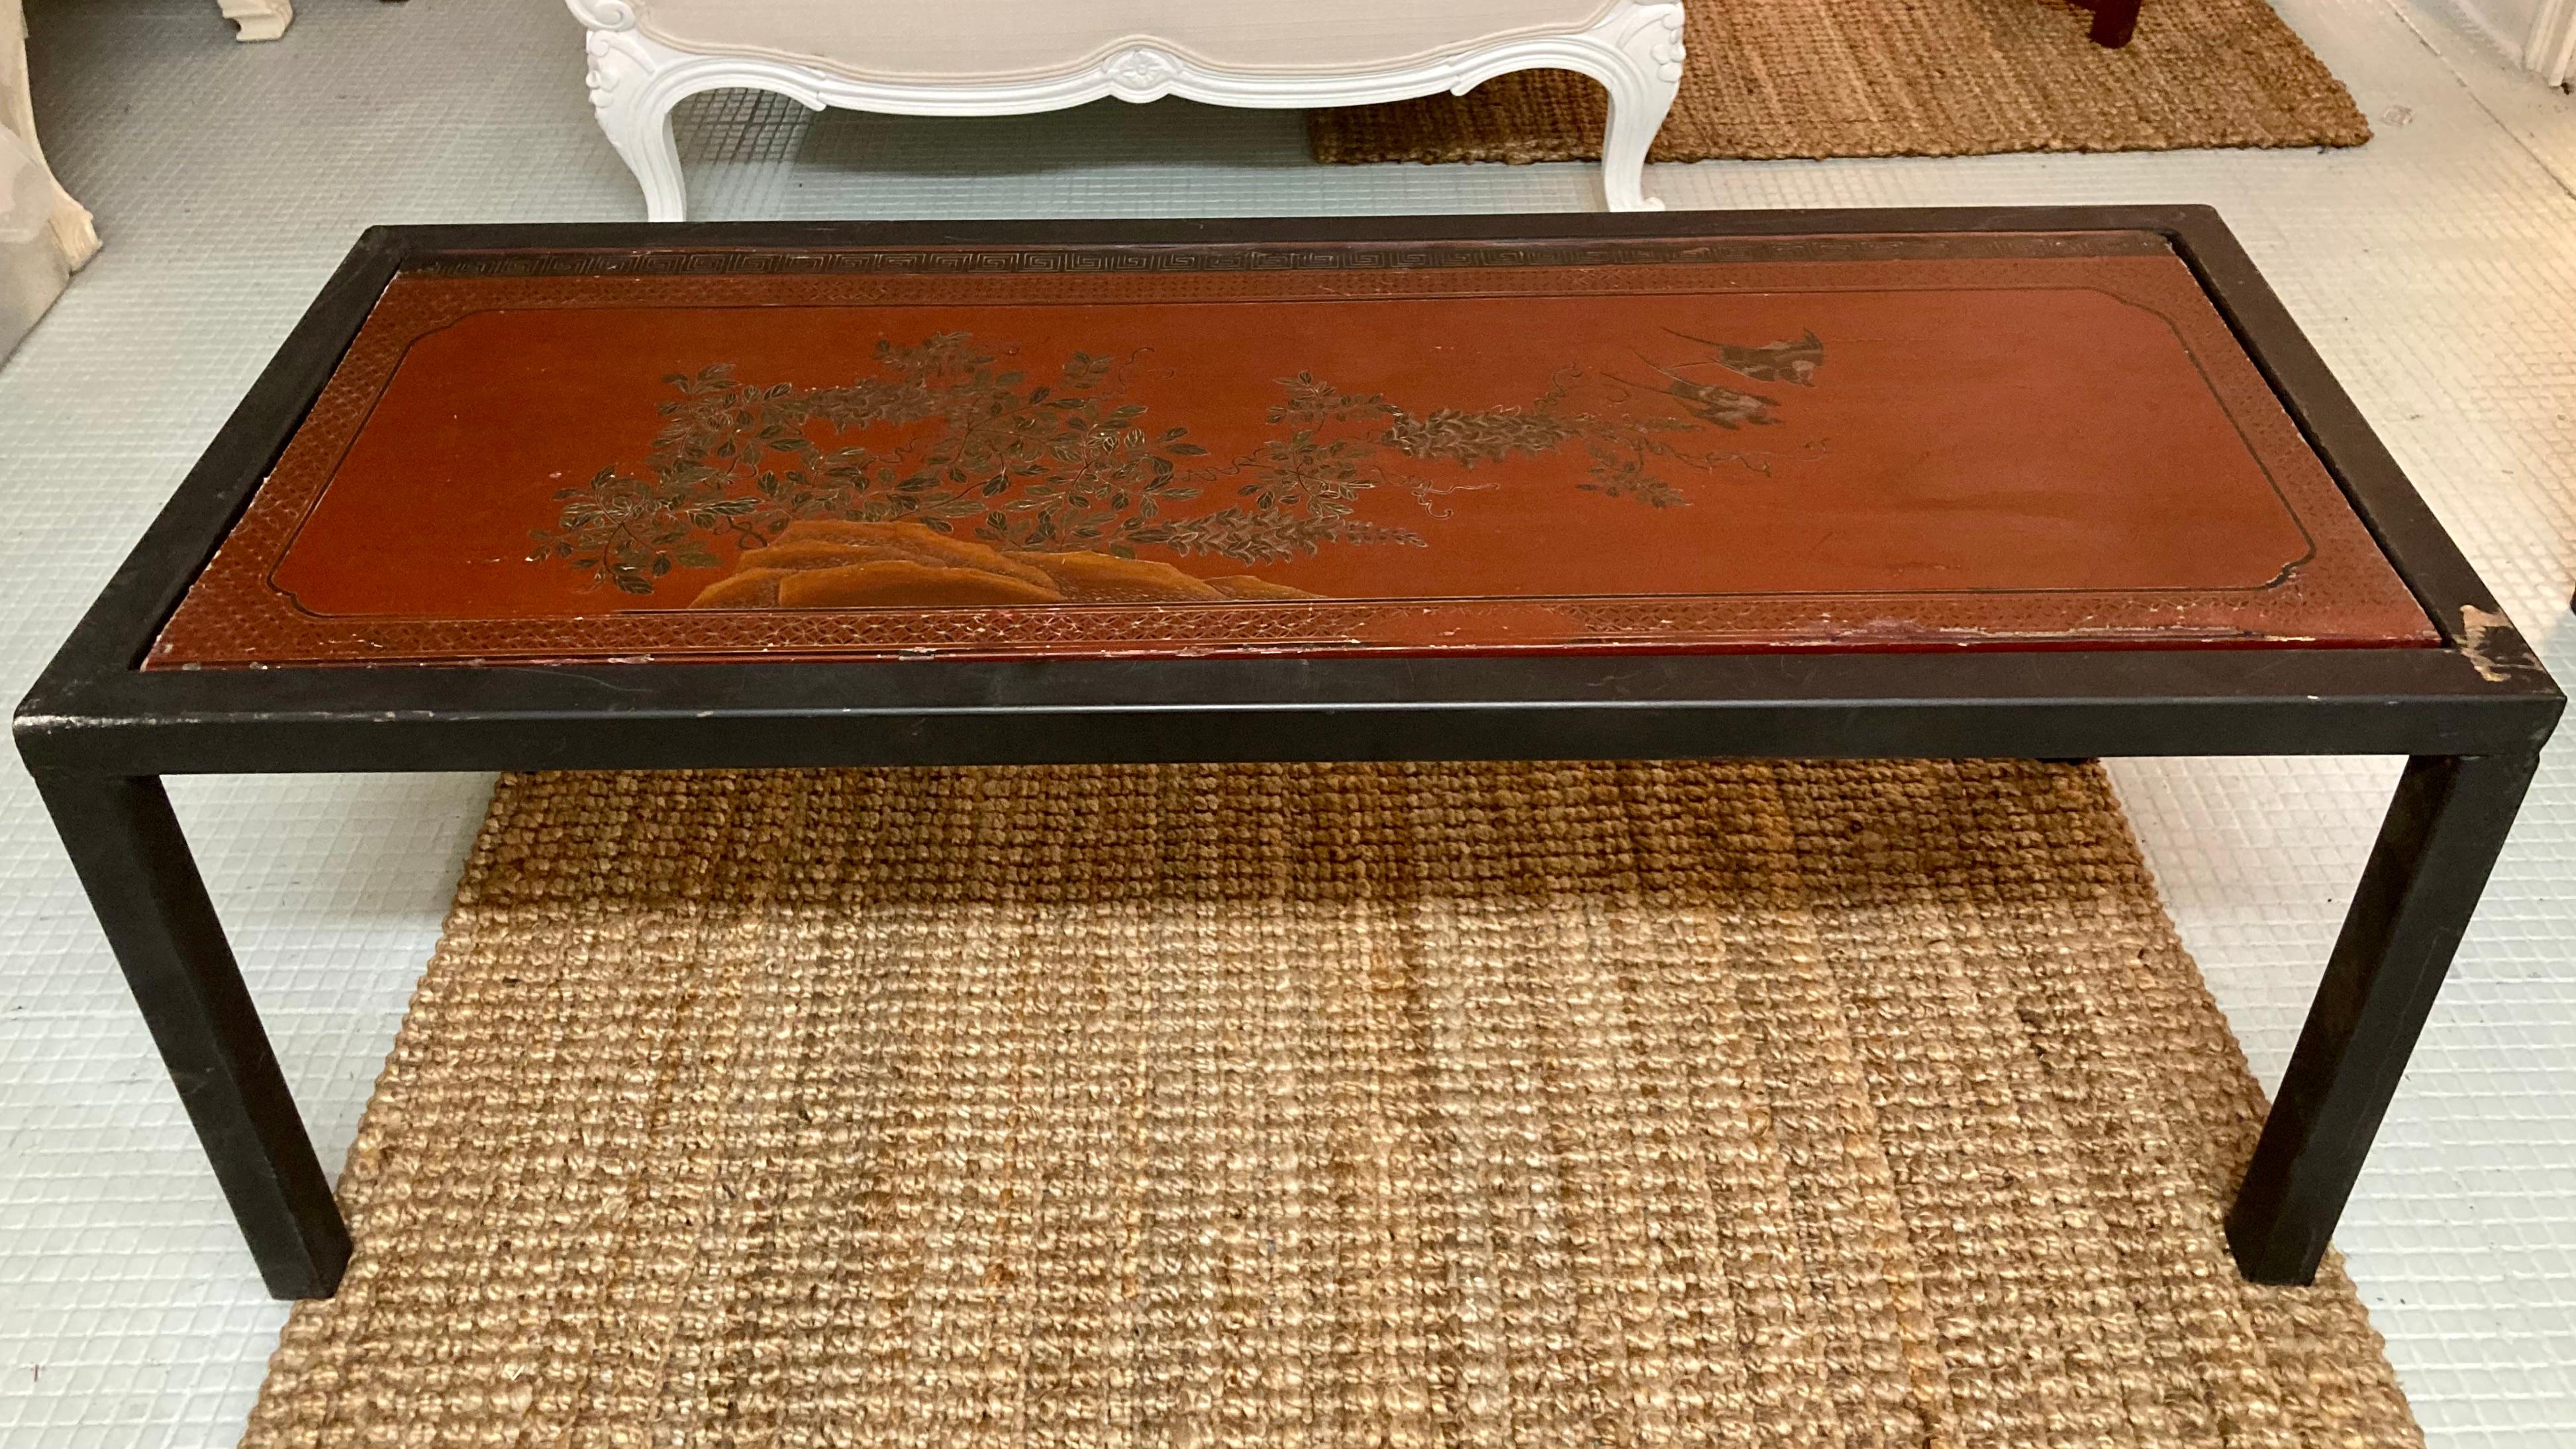 Beautiful Tony Duquette custom coffee table with inset Chinese panel. Nice drawing details on the panel. We have a second table very similar to this piece with slightly different dimensions, so collect both! From the Estate of Tony Duquette.